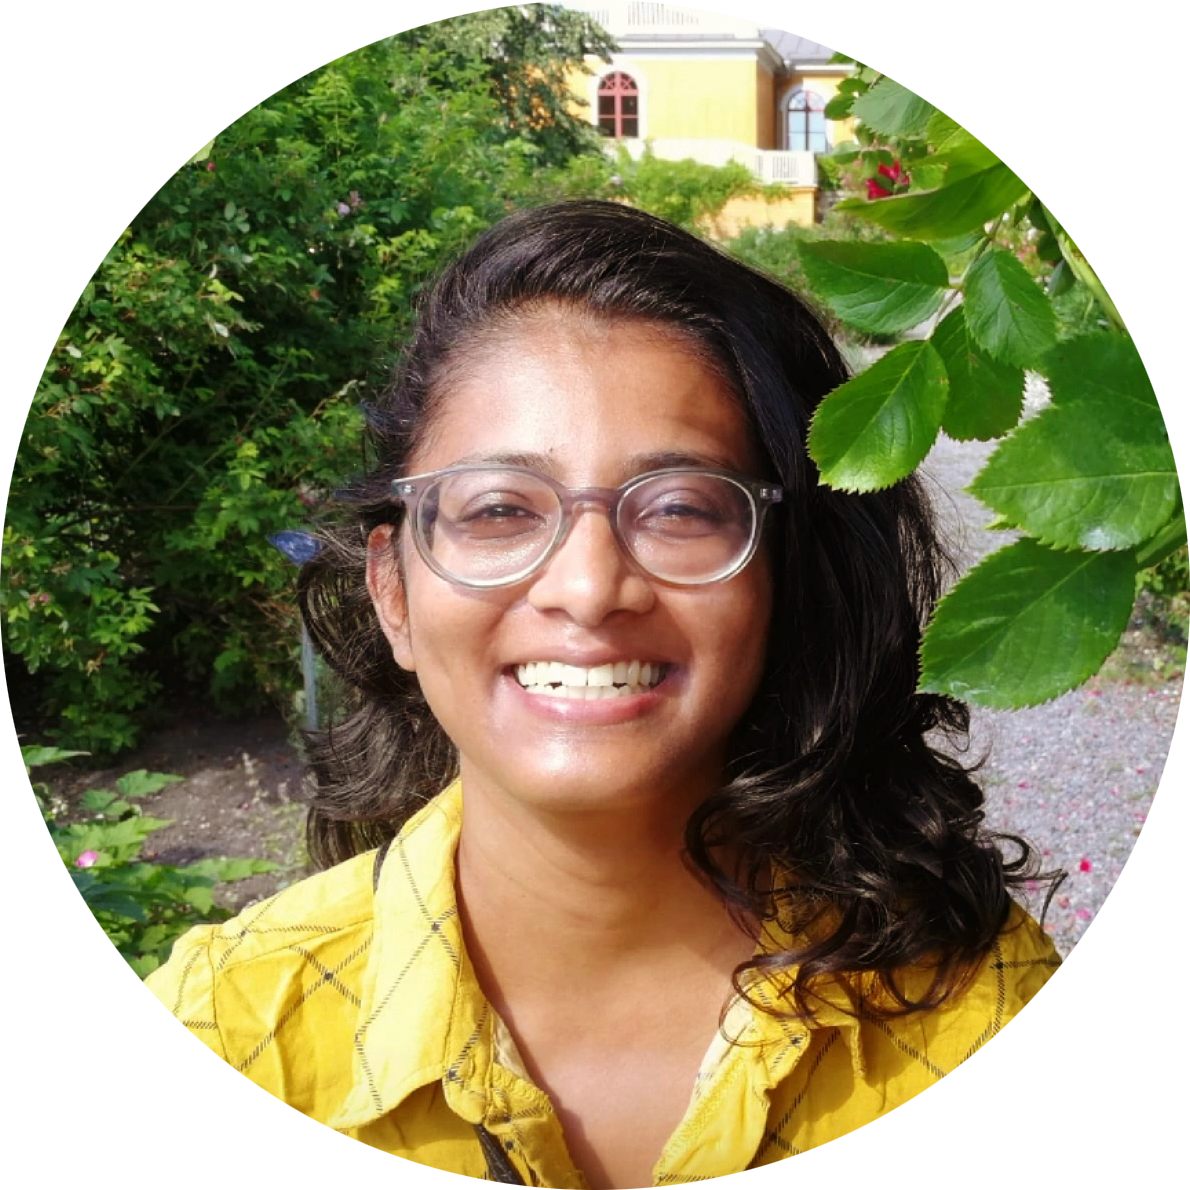 Woman of Indian descent wearing rounded glasses and a yellow shirt smiling broadly.